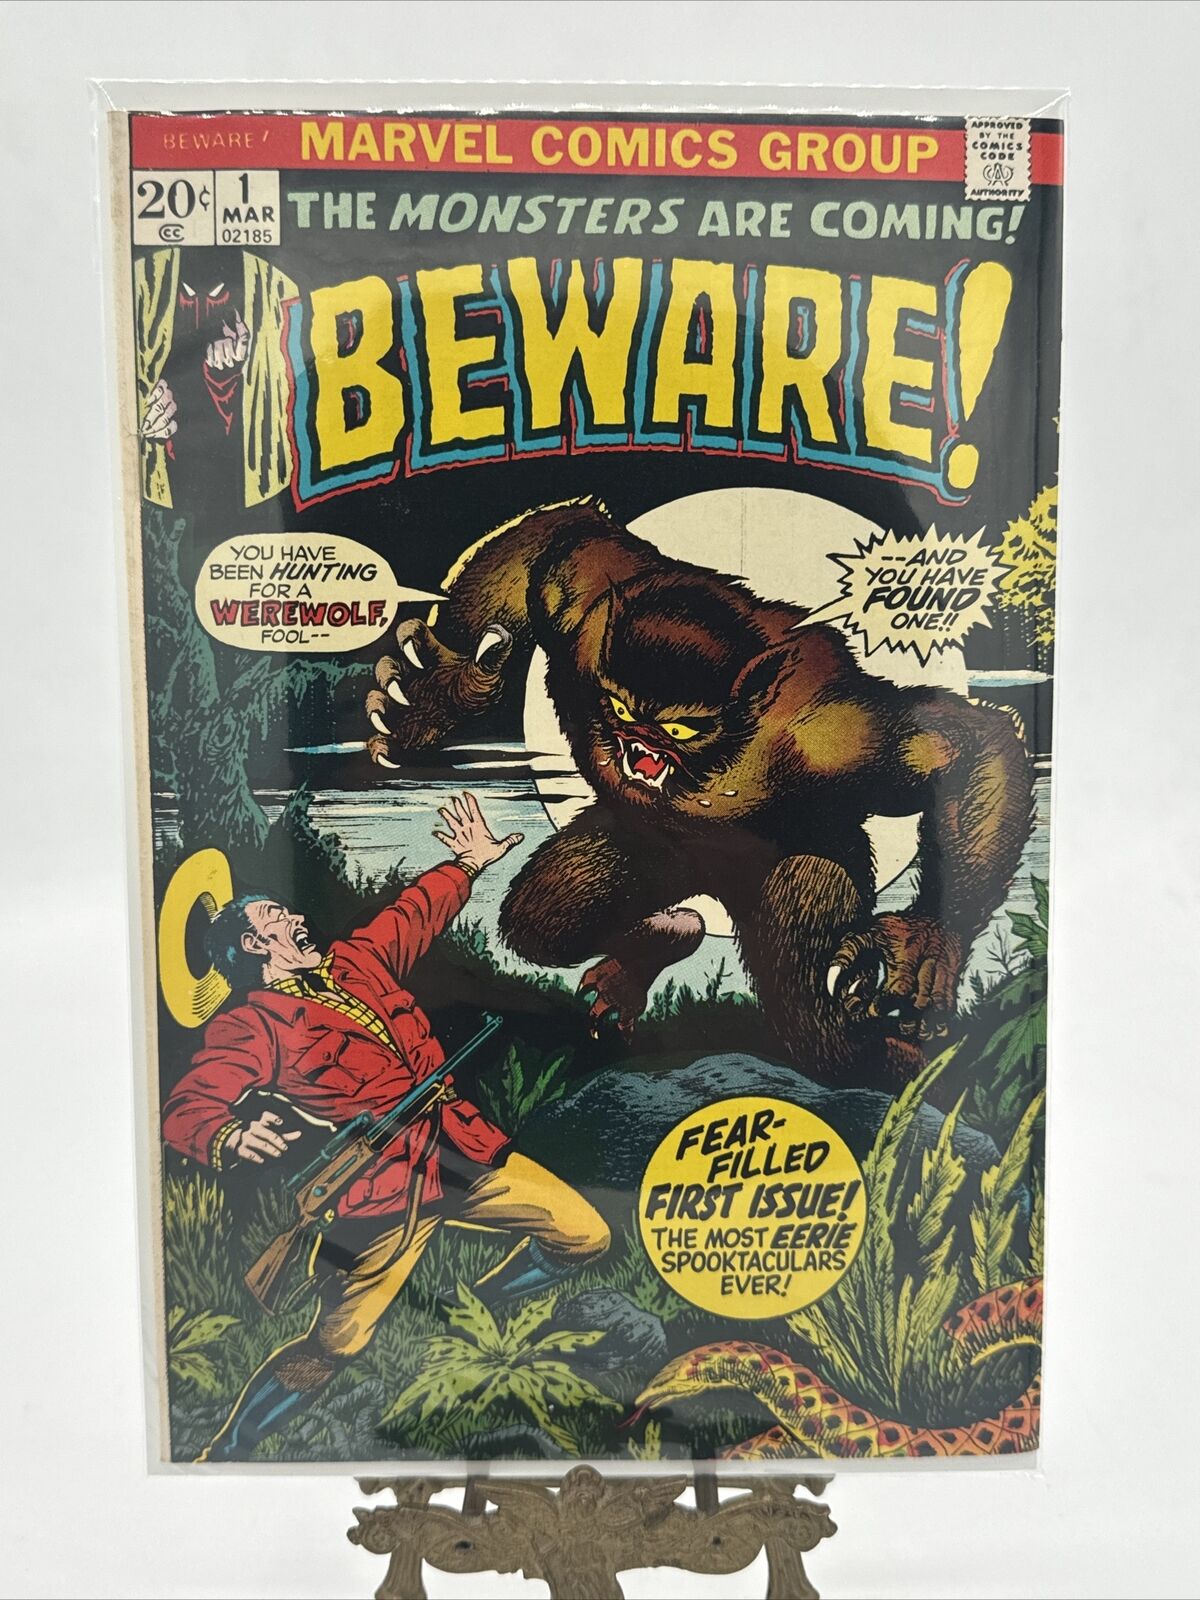 VINTAGE Beware The Monsters are Coming Marvel Comics 1973 #1 Horror Werewolf